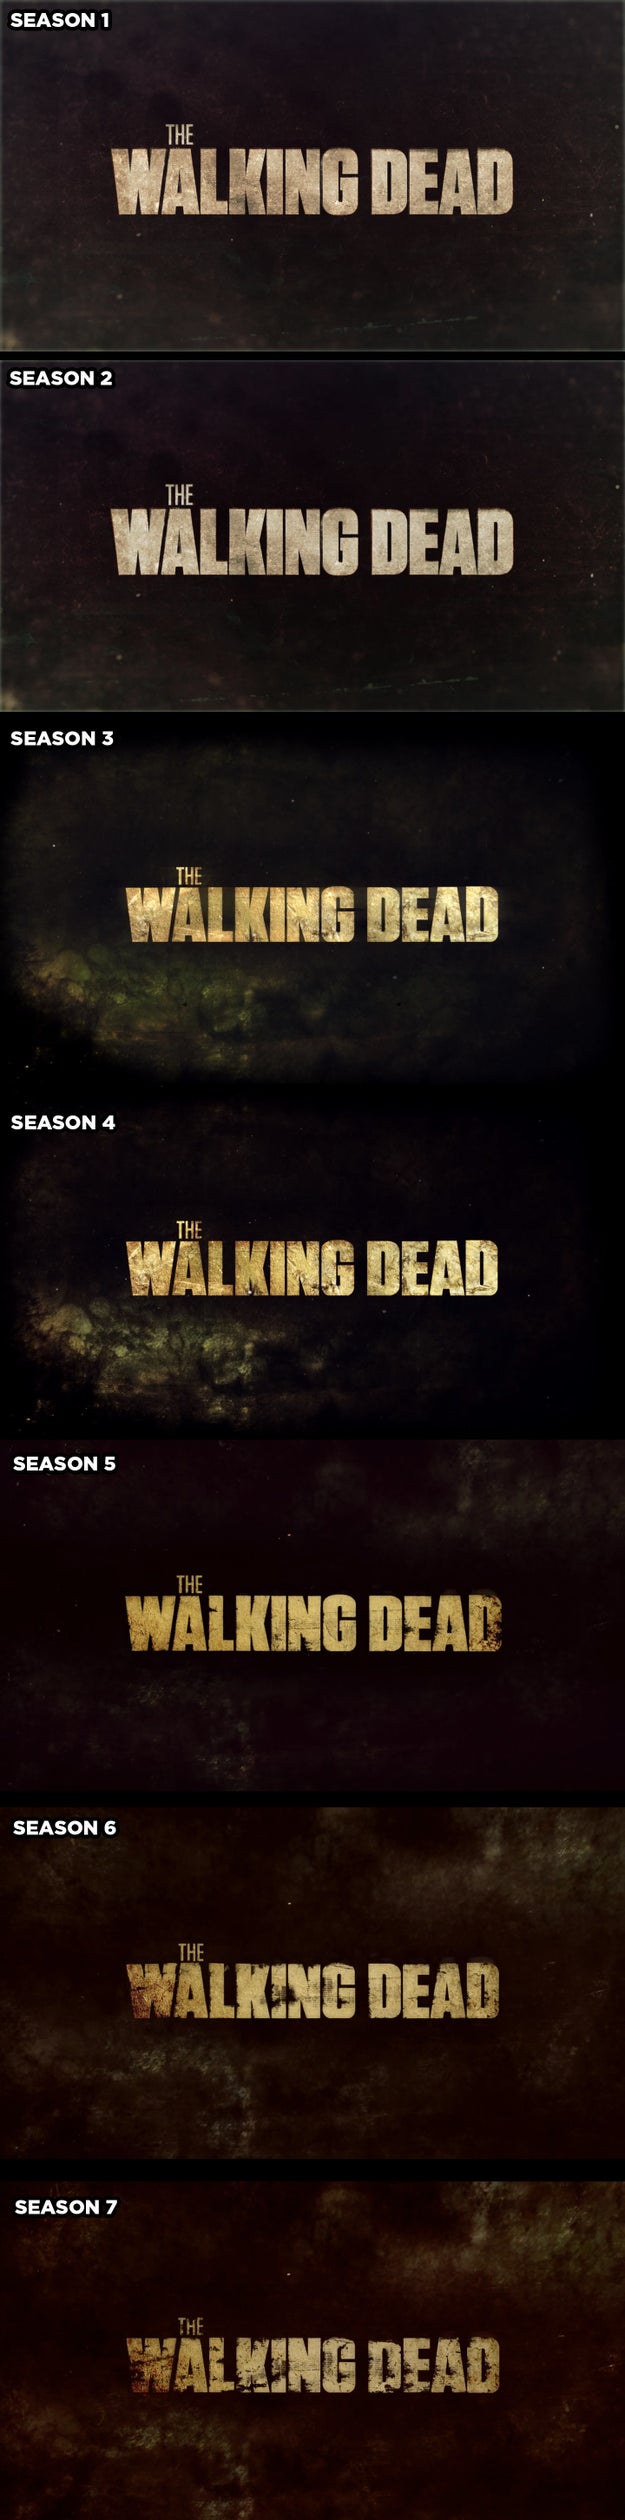 The title screen during the opening credits decays a little every season.